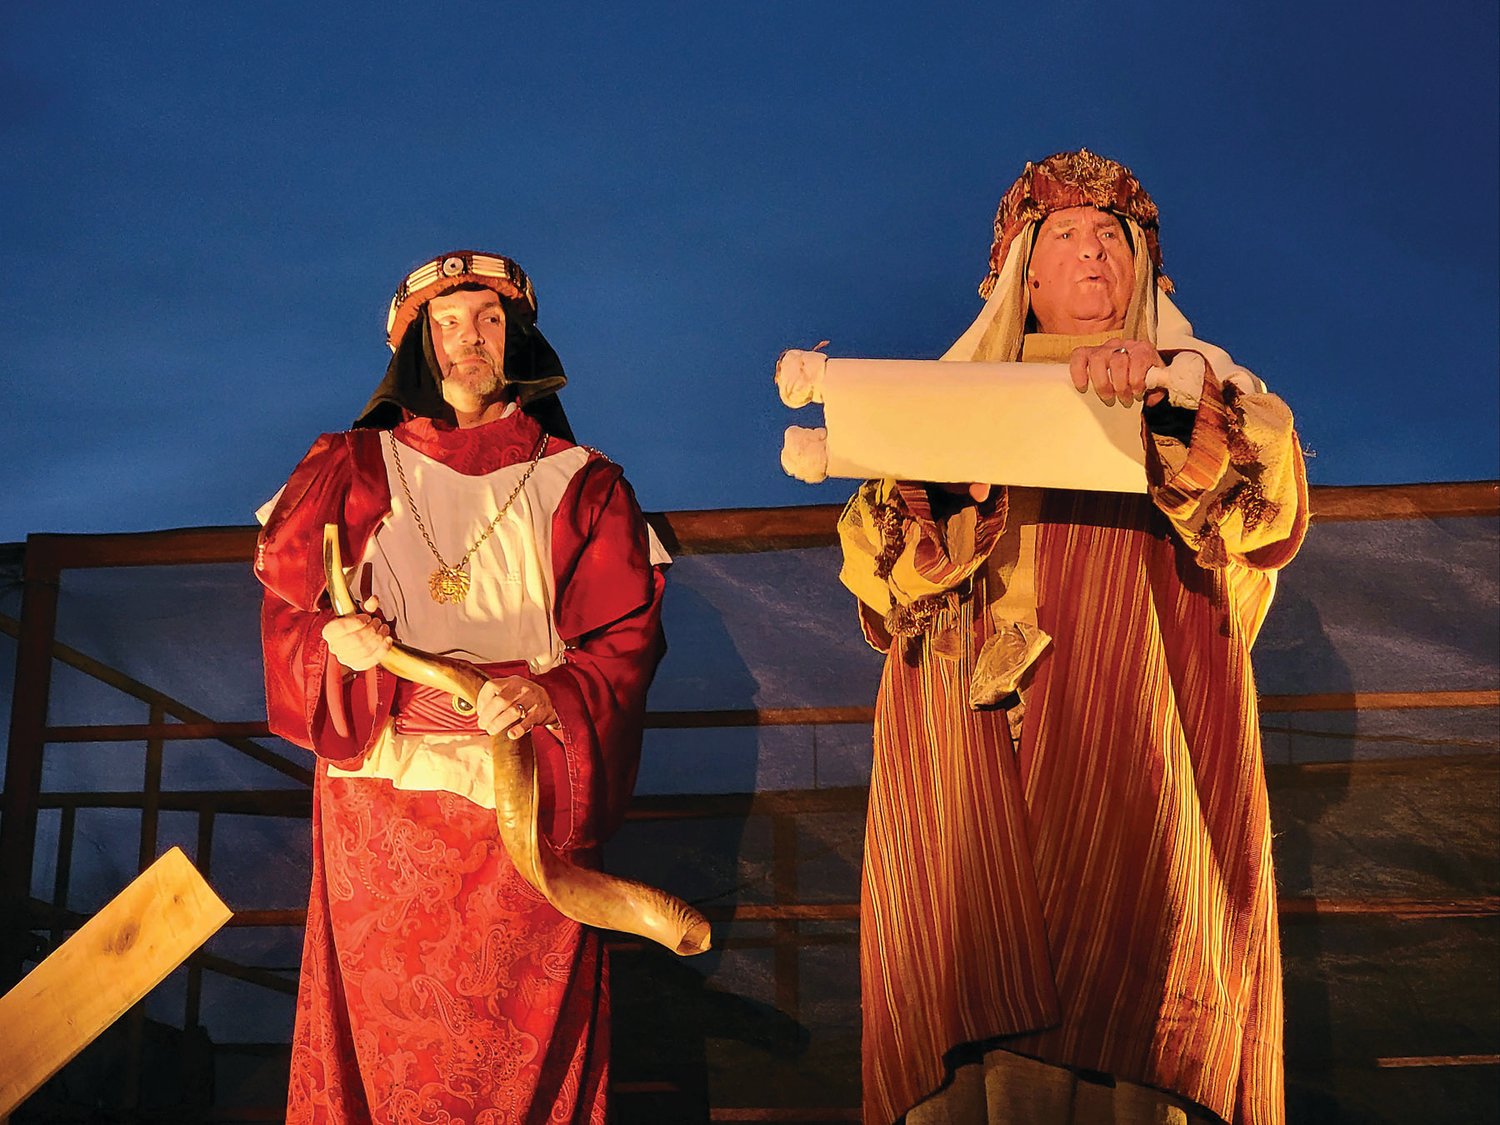 Living Hope Community Church in Dublin presented its Living Nativity, an outdoor walk-through presentation about the birth of Christ, Dec. 16 to 19.